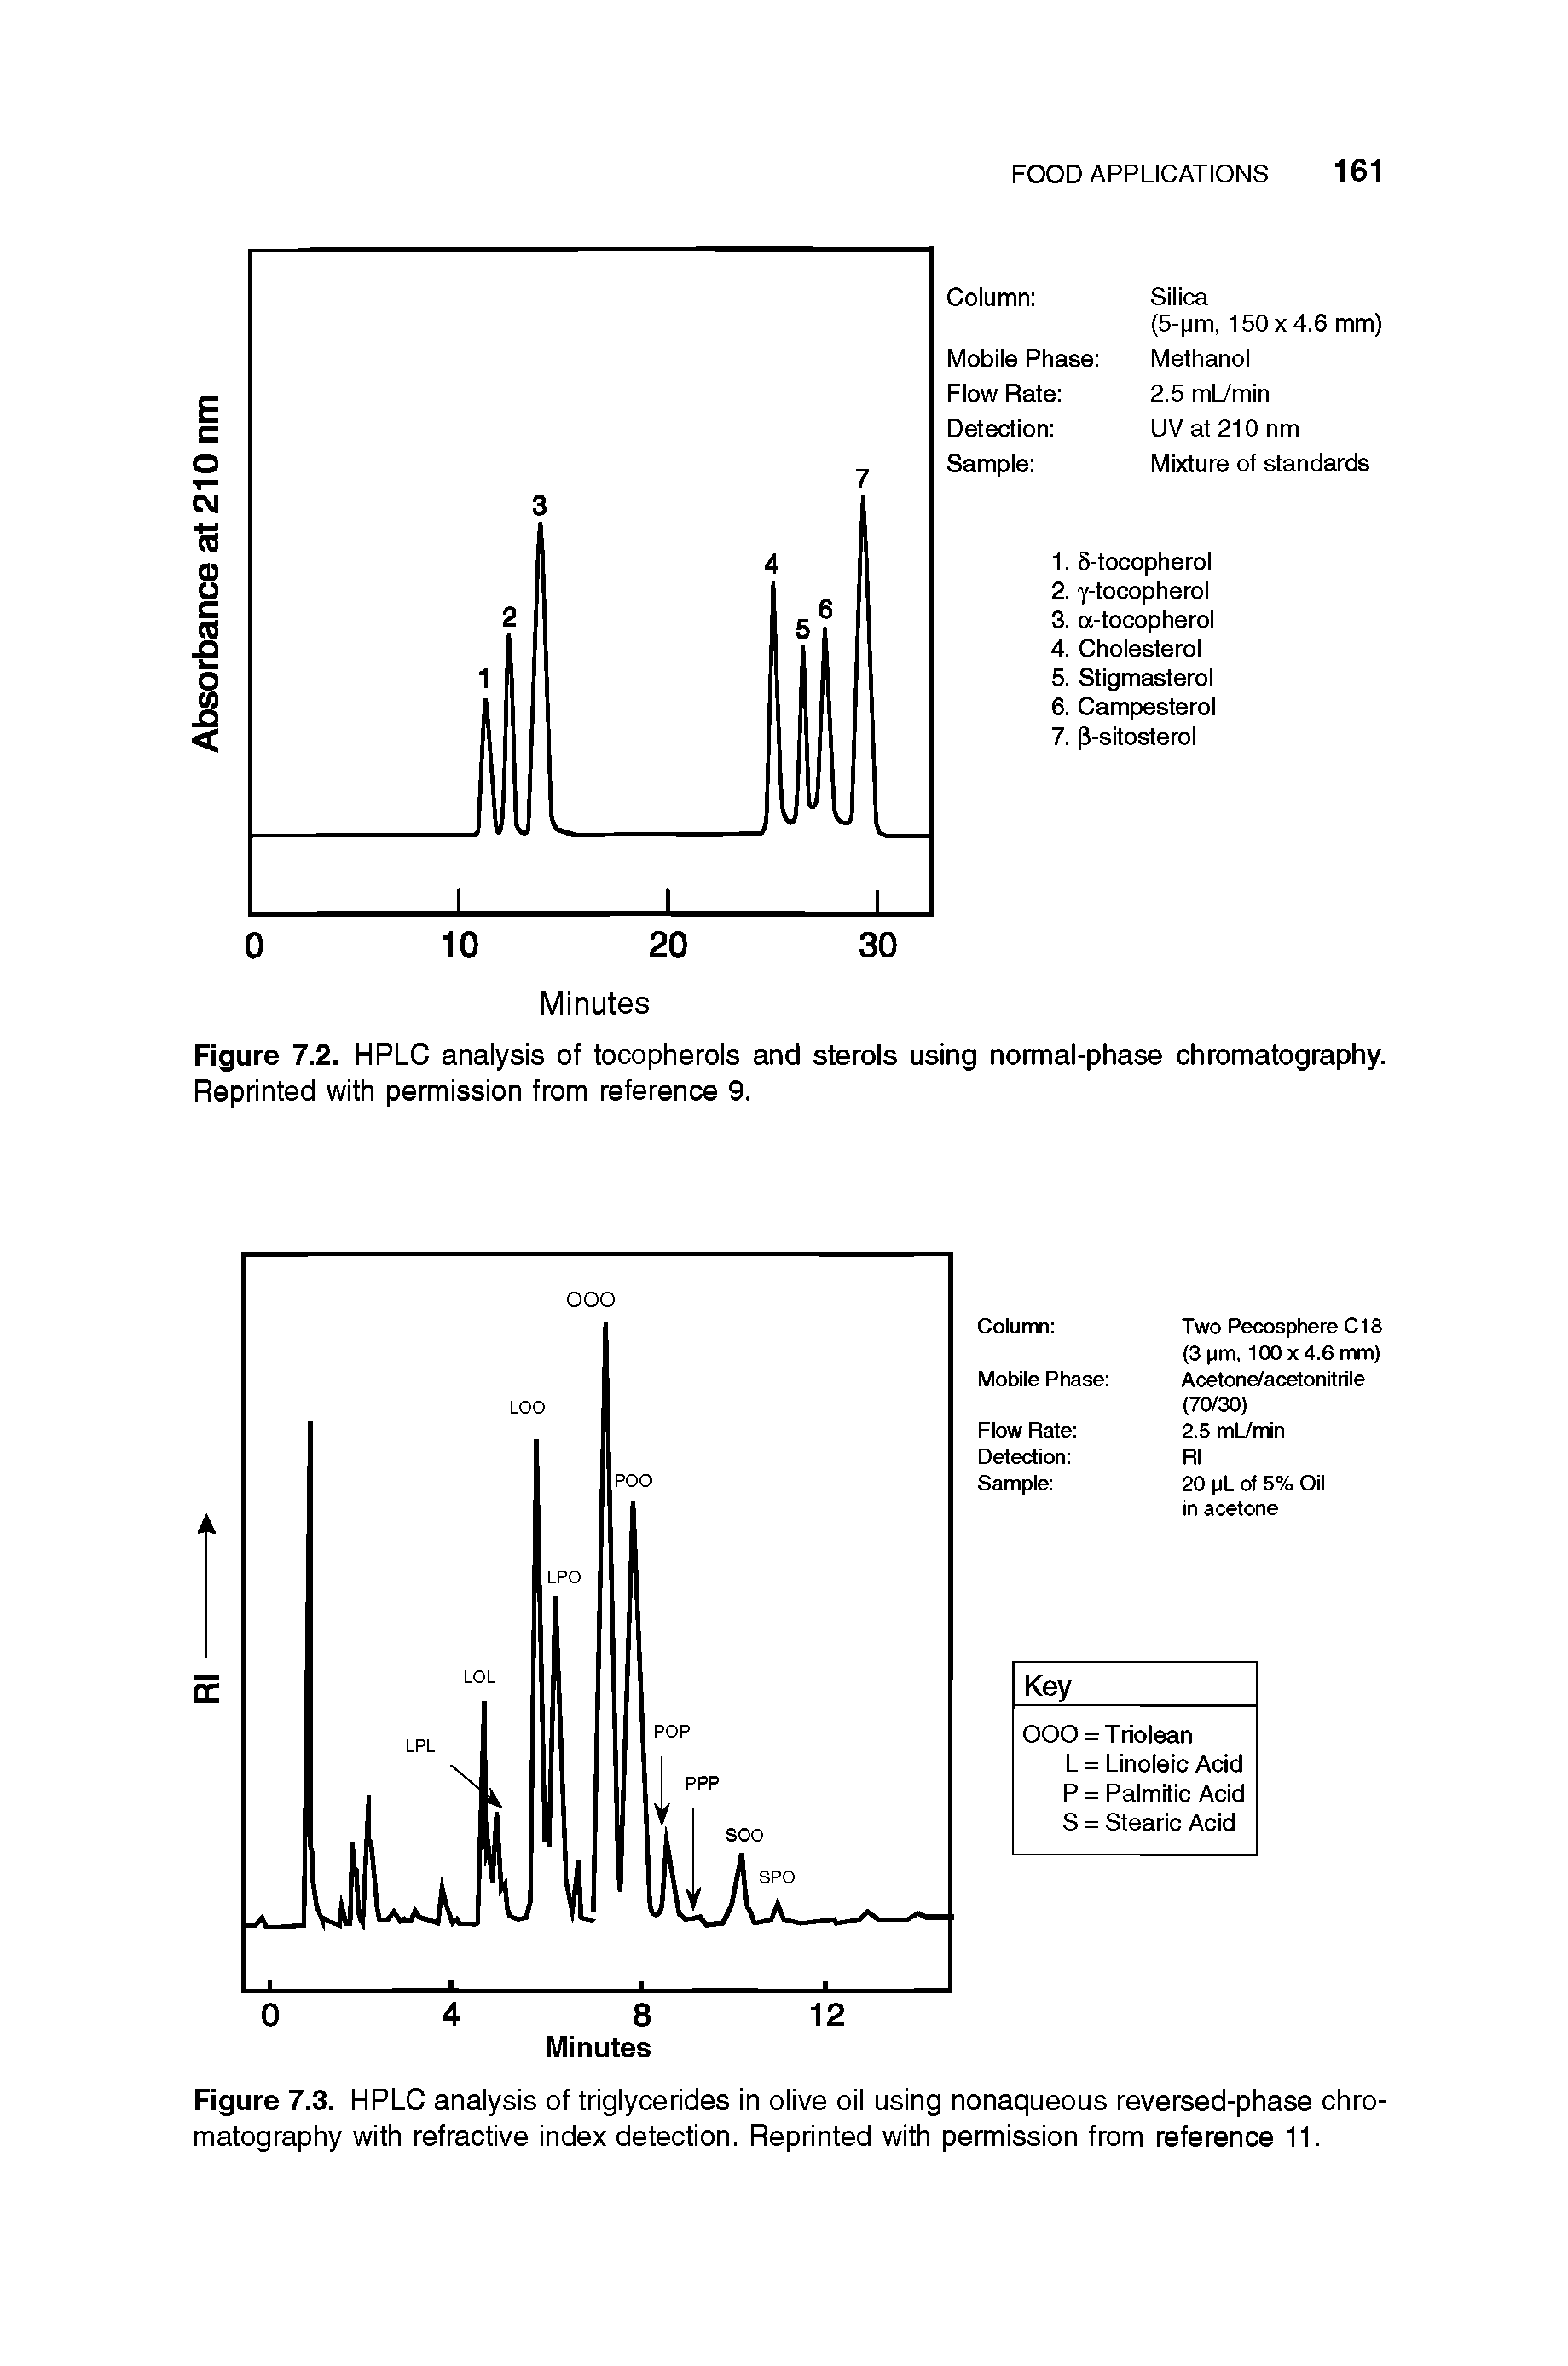 Figure 7.2. HPLC analysis of tocopherols and sterols using normal-phase chromatography. Reprinted with permission from reference 9.